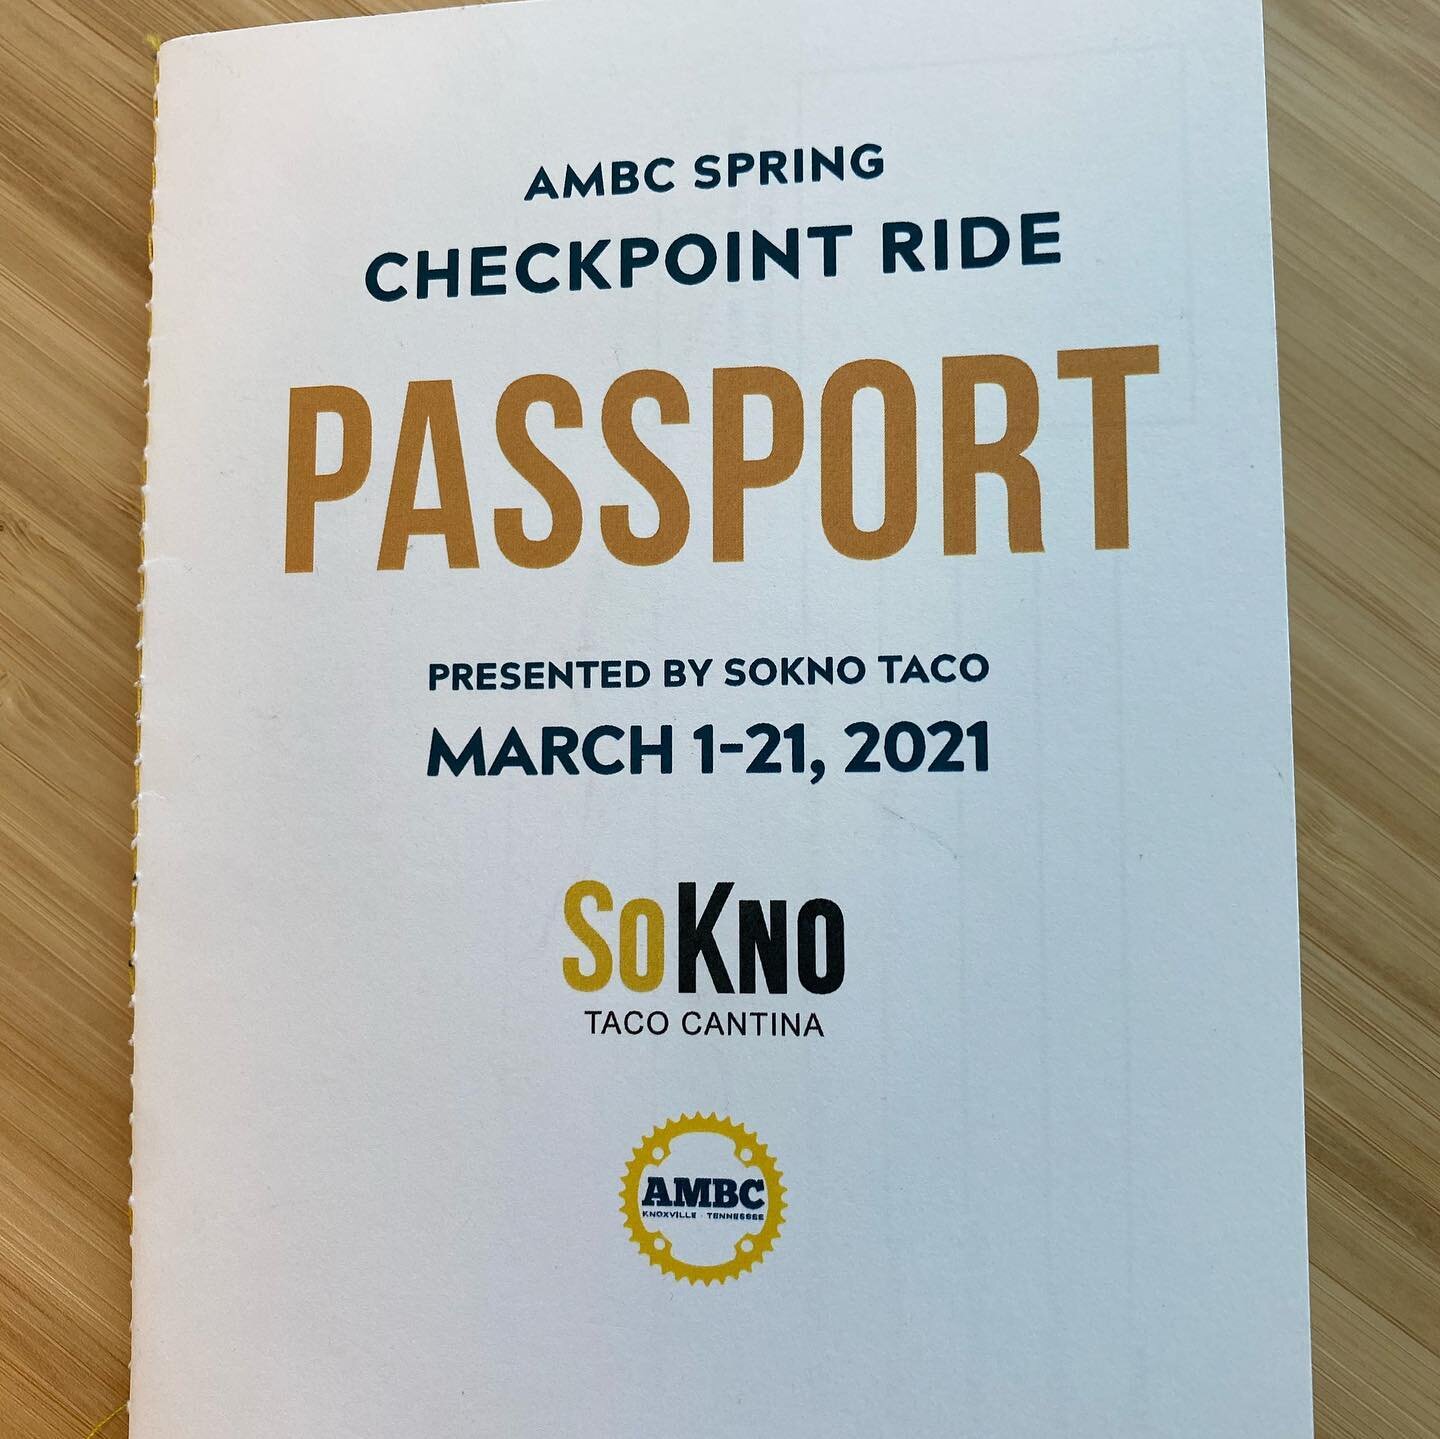 Ride the trails Farthest East. Take the road to Burnett Creek. Book a stay for your bike getaway!
.
Pickup your passport at SoKno Taco Cantina! Support @ambcknox and celebrate the 4th birthday of @sokno_taco !!!